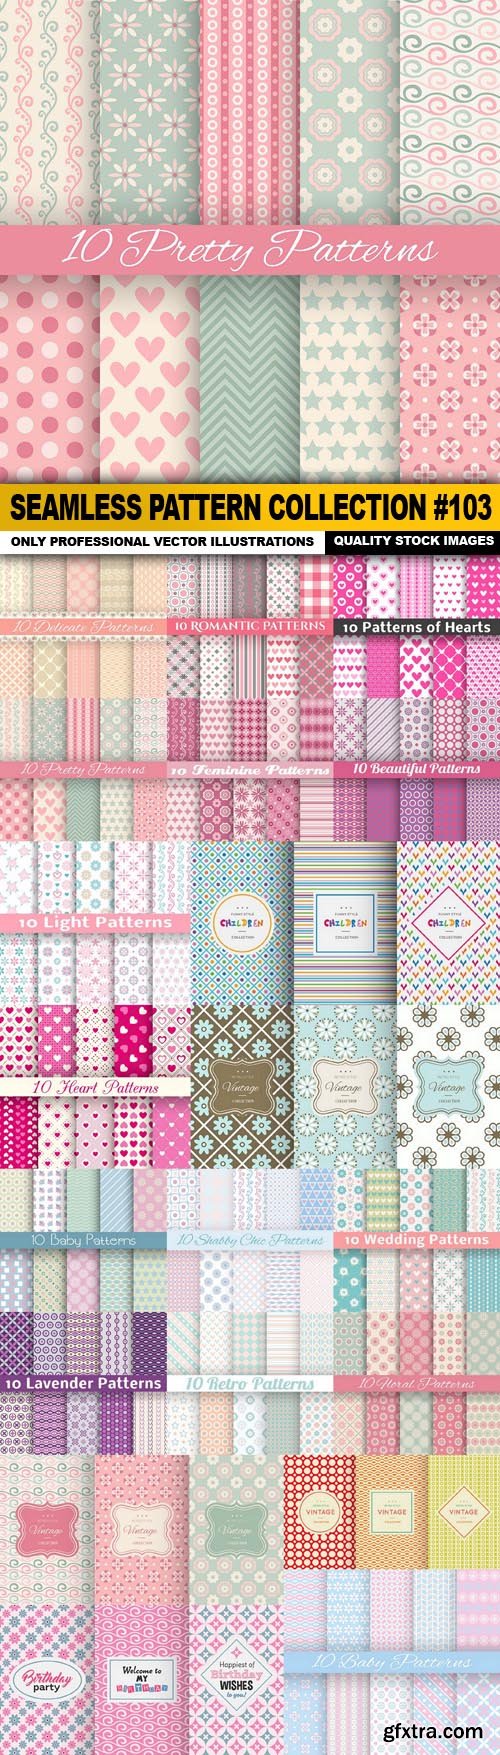 Seamless Pattern Collection #103 - 20 Vector